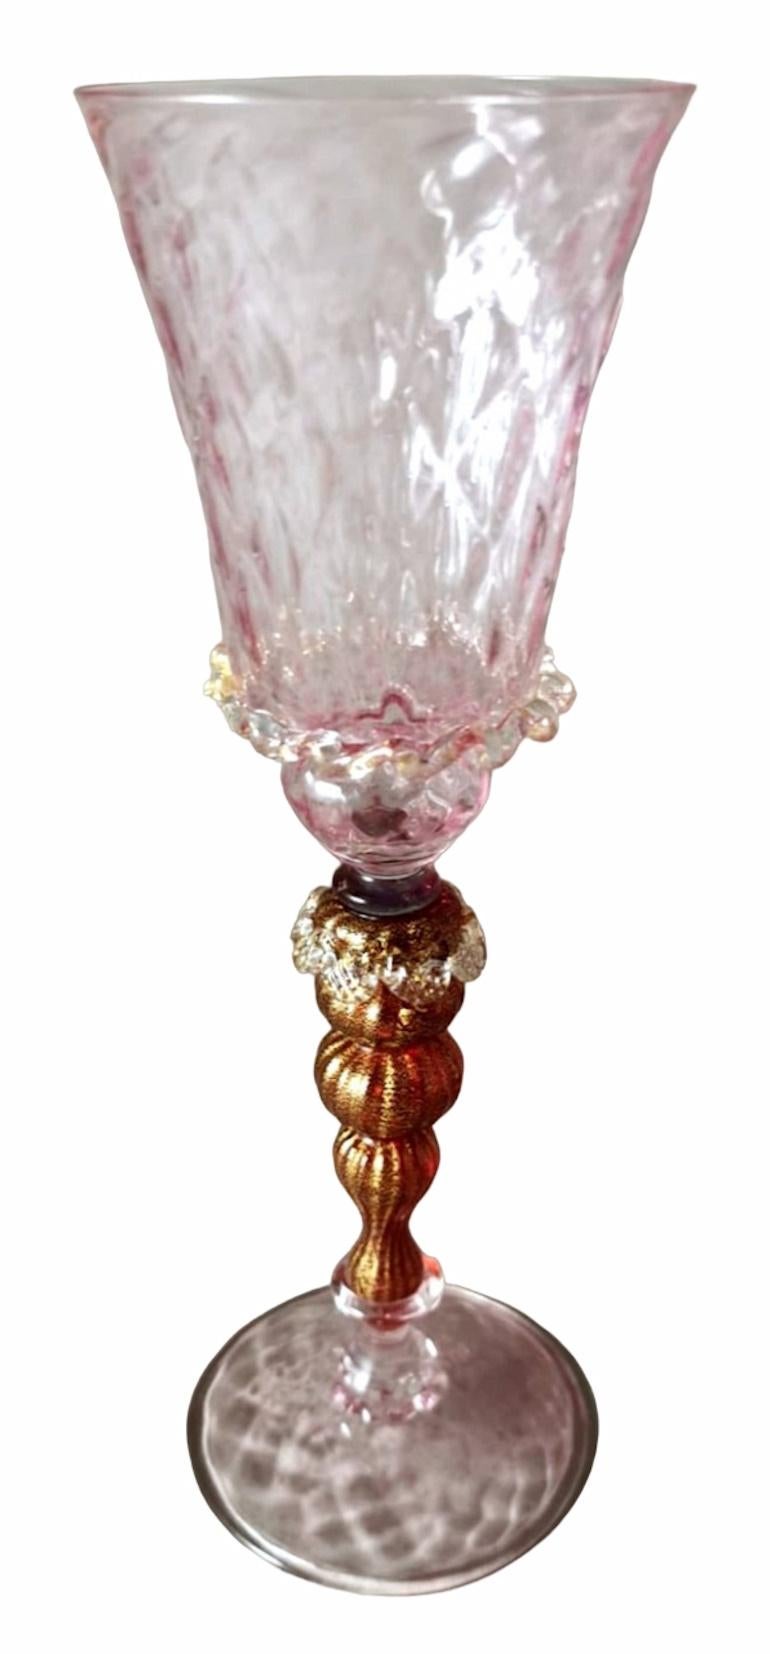 We kindly suggest that you read the entire description, as with it we try to give you detailed technical and historical information to guarantee the authenticity of our objects.
Exceptional hot-blown Murano glass goblet; it has a stem worked with